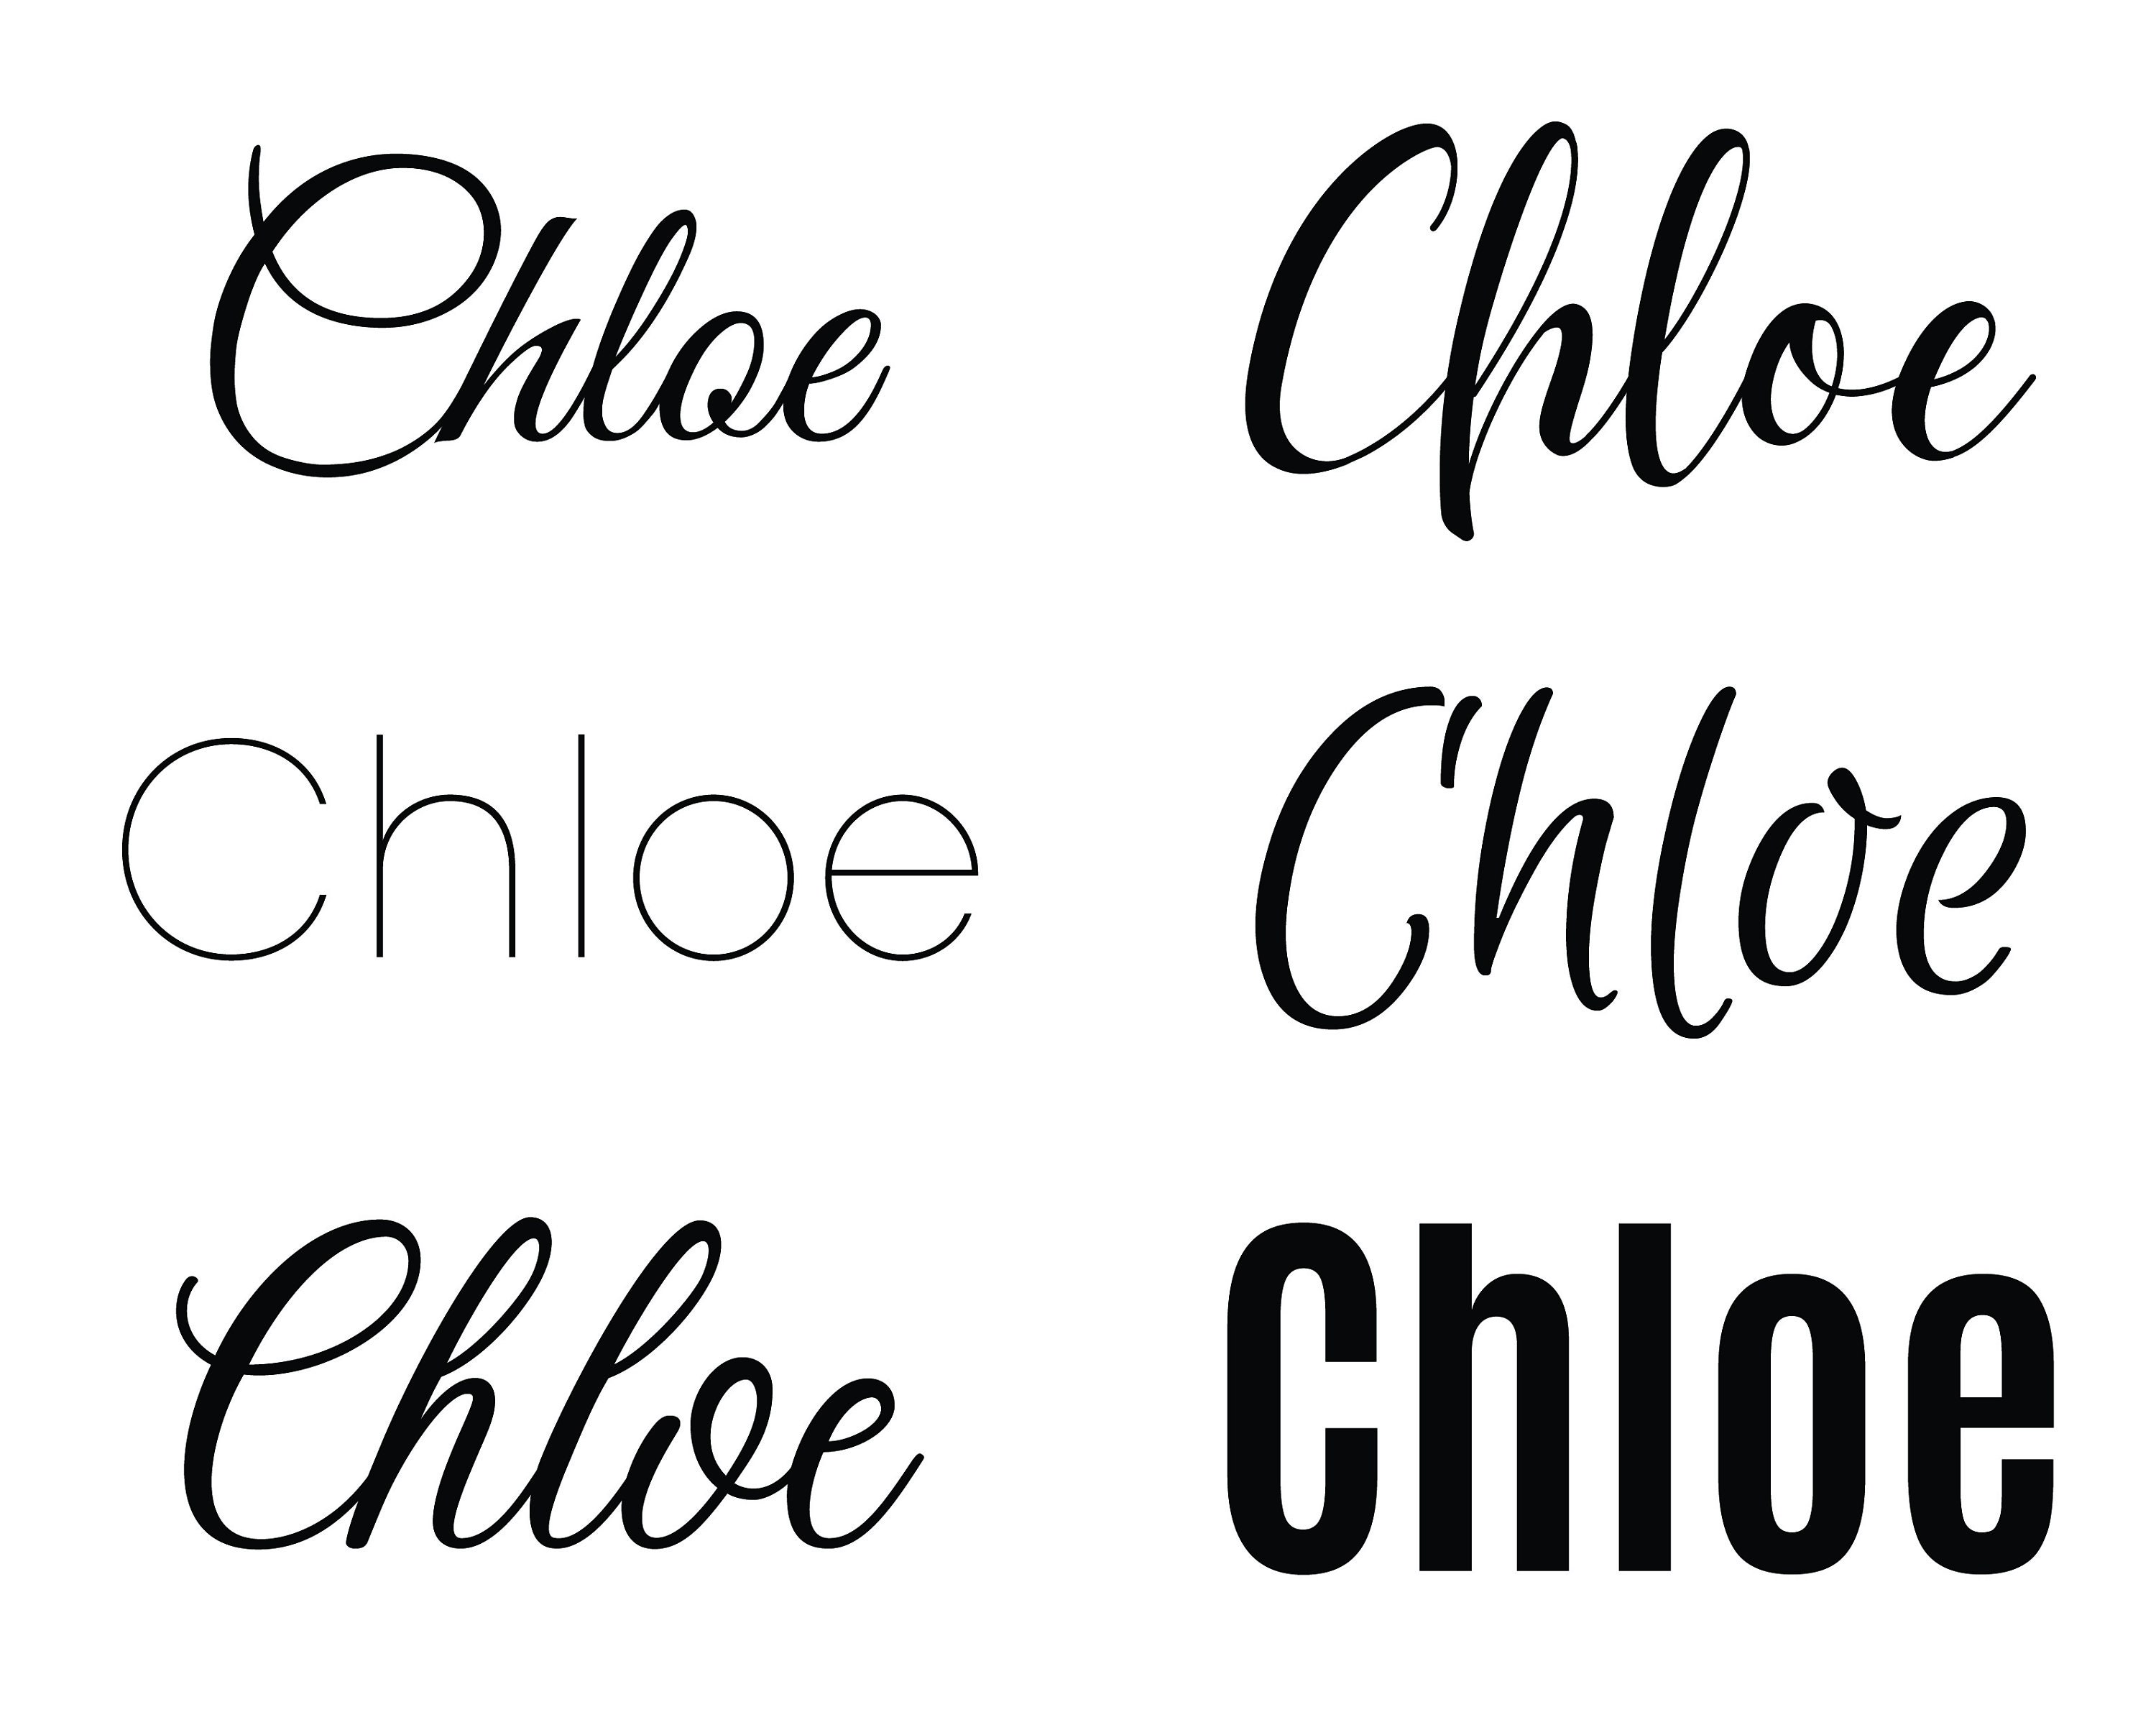 name Chloe in various Retro graphic design elements, set of vector